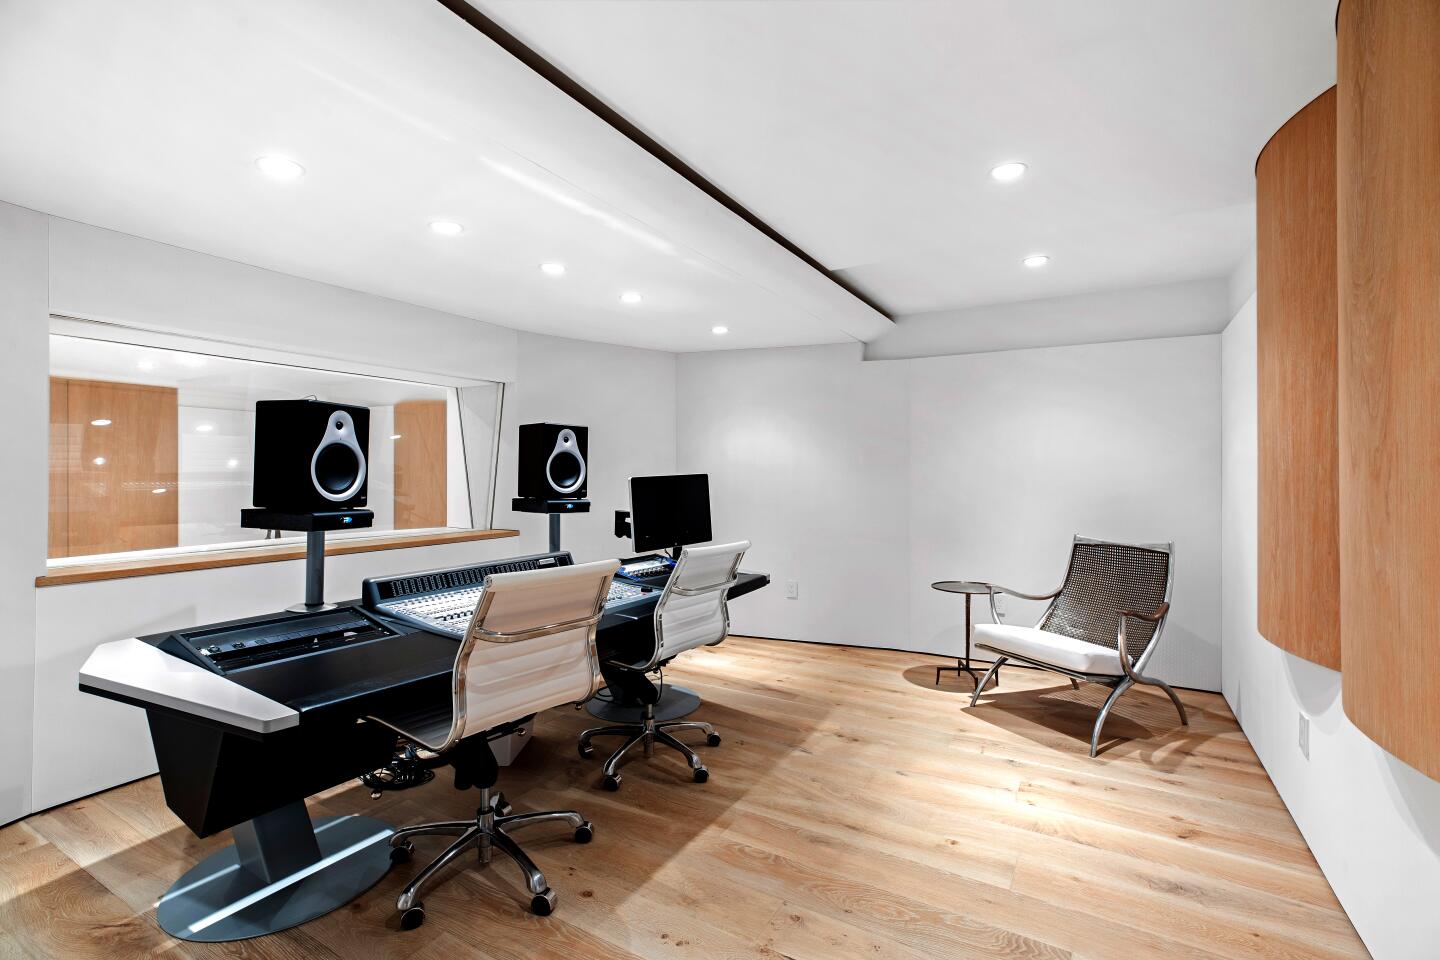 A two-room recording studio lies beneath the home, where there's also a subterranean garage.